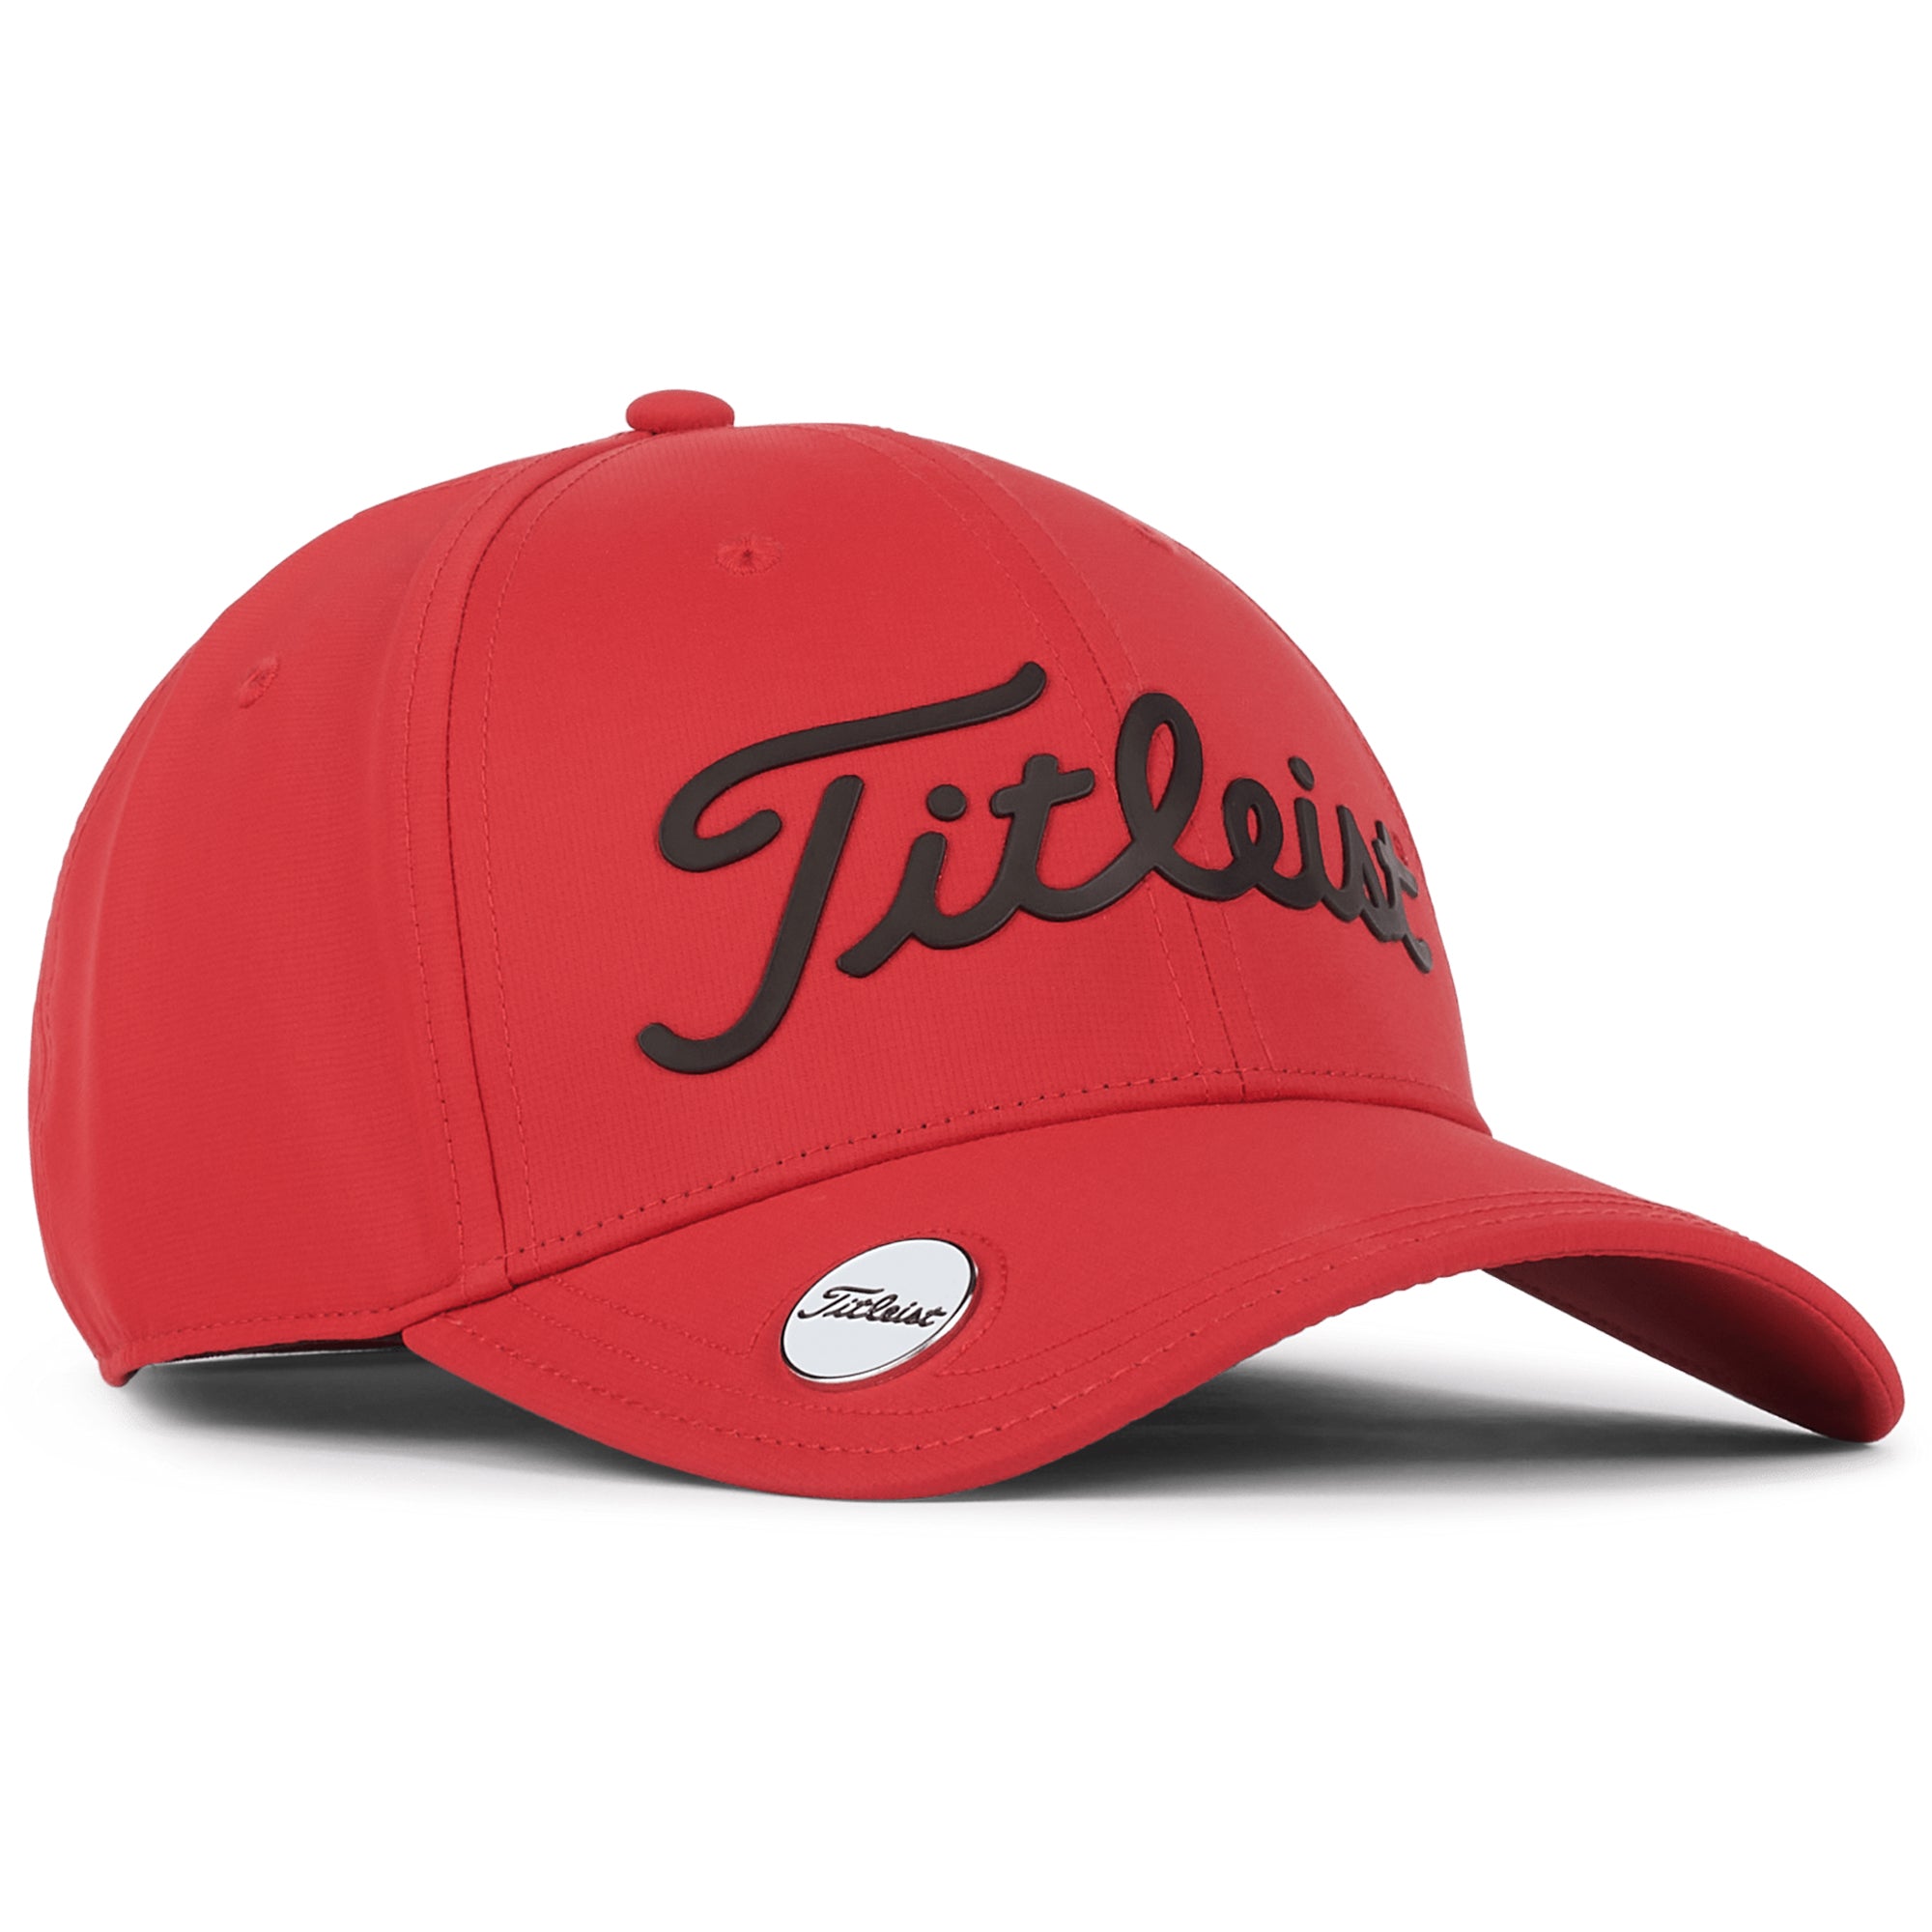 titleist-performance-ball-marker-cap-th22appbme-60-red-white